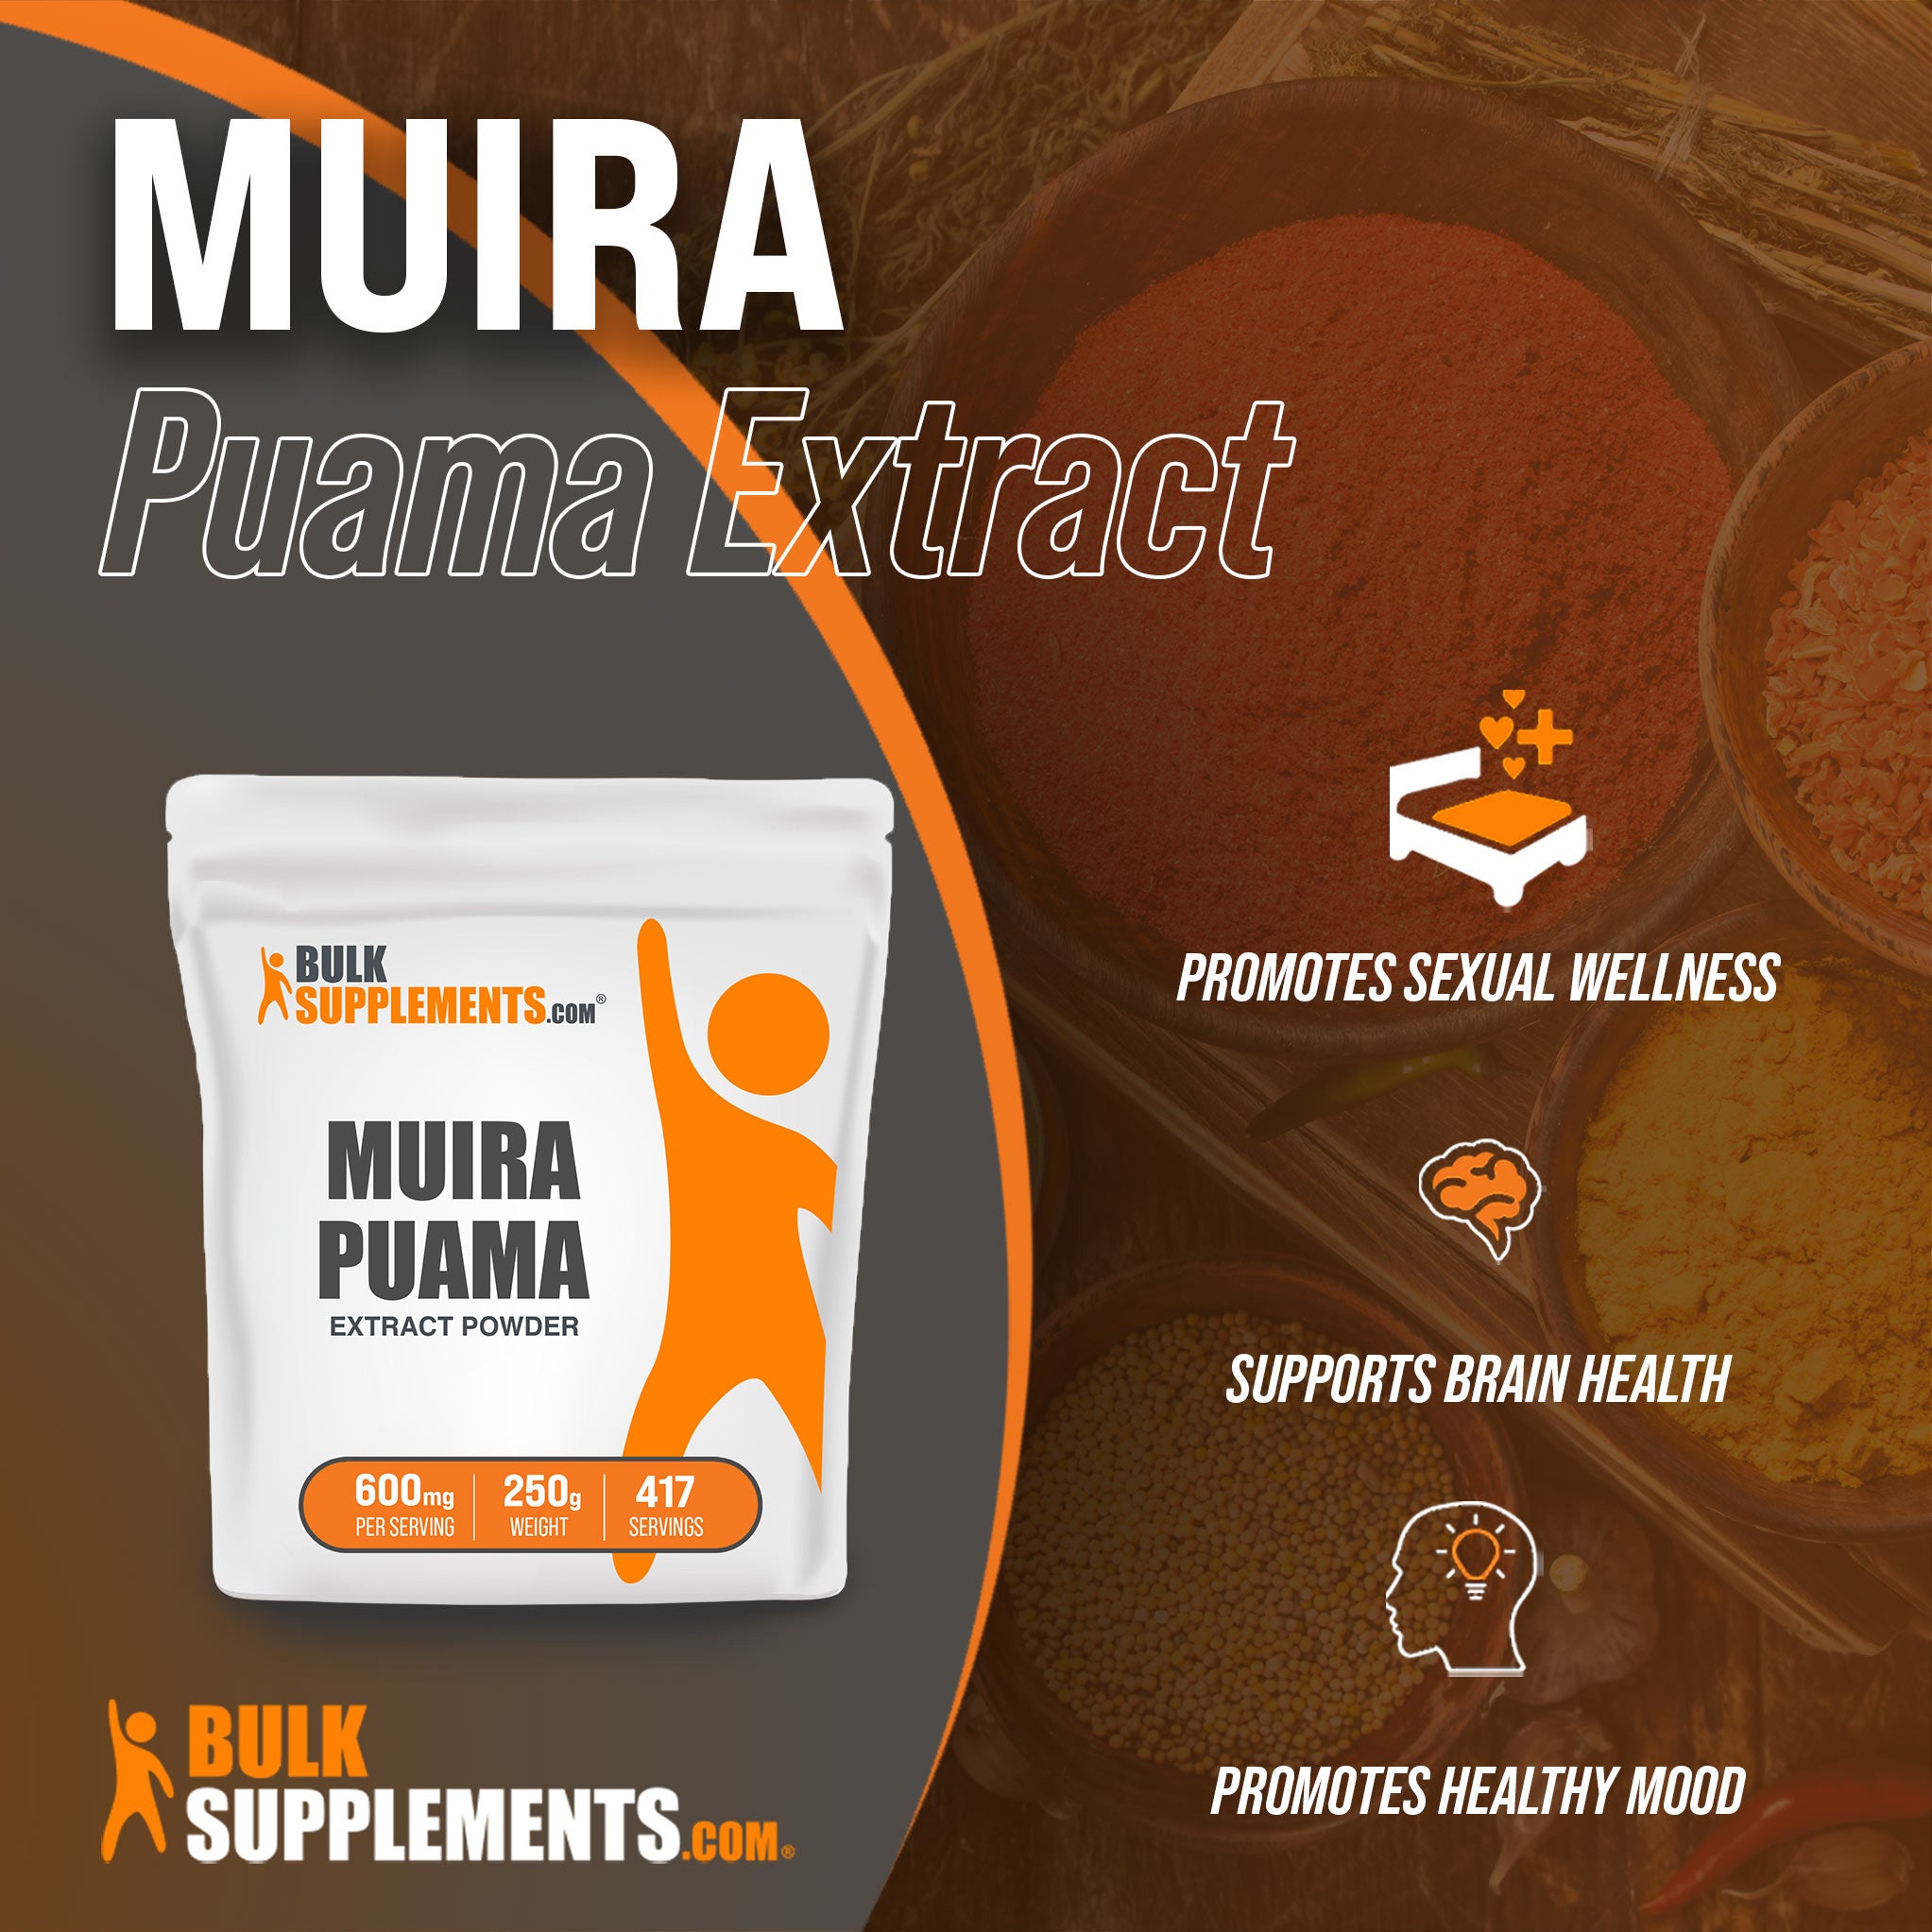 Benefits of Muira Puama Extract: promotes sexual wellness, supports brain health, promotes healthy mood